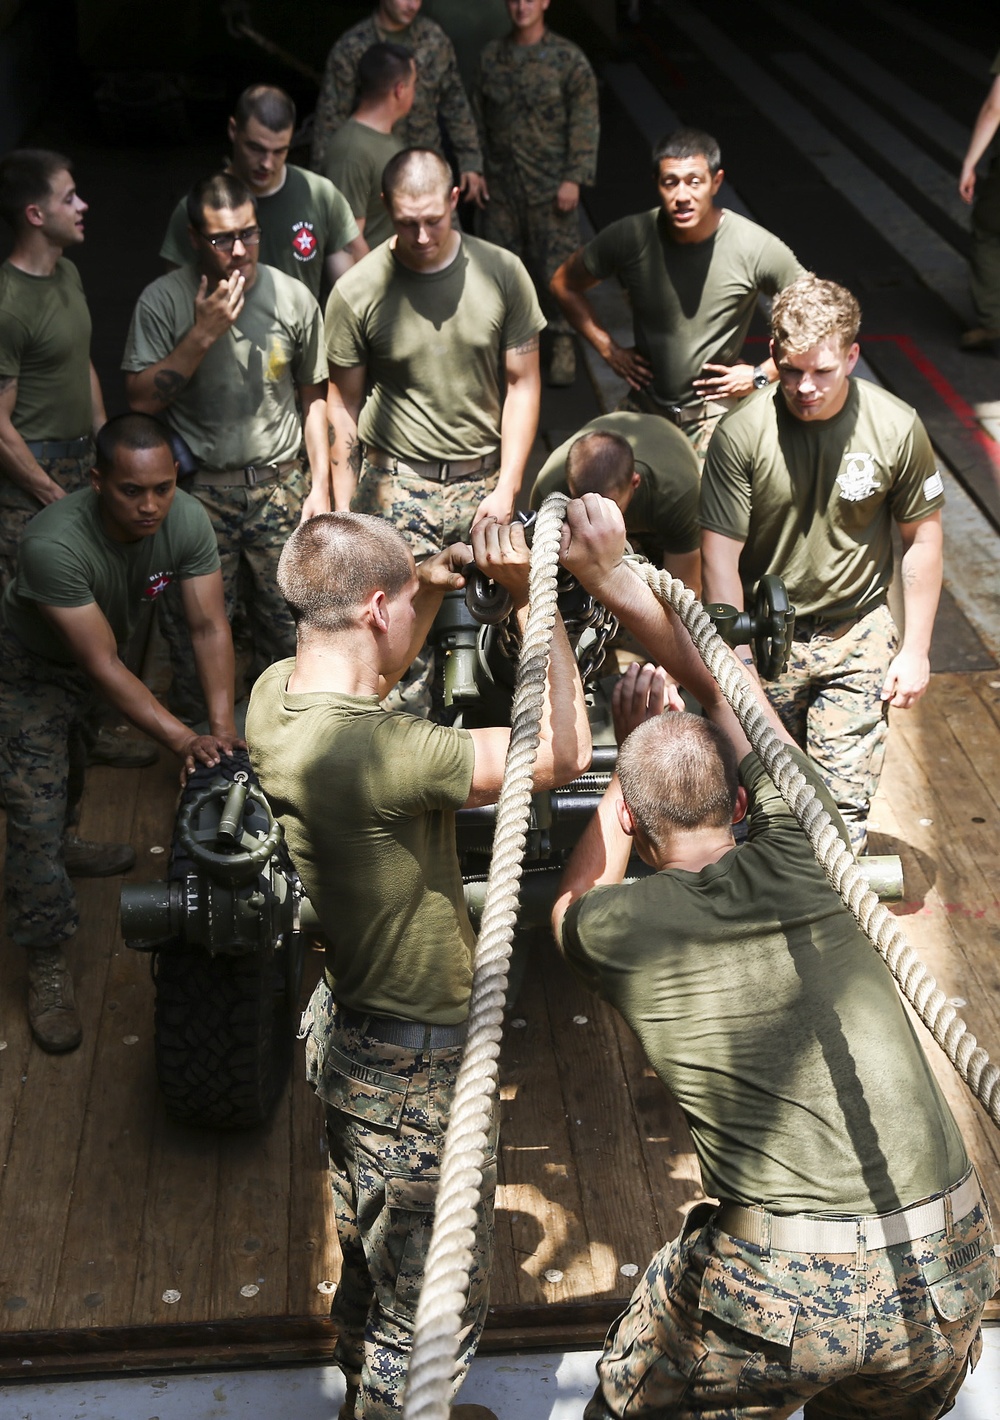 Marines with 2nd Plt. Mortars and AAV conduct a Mortar Load Training Exercise